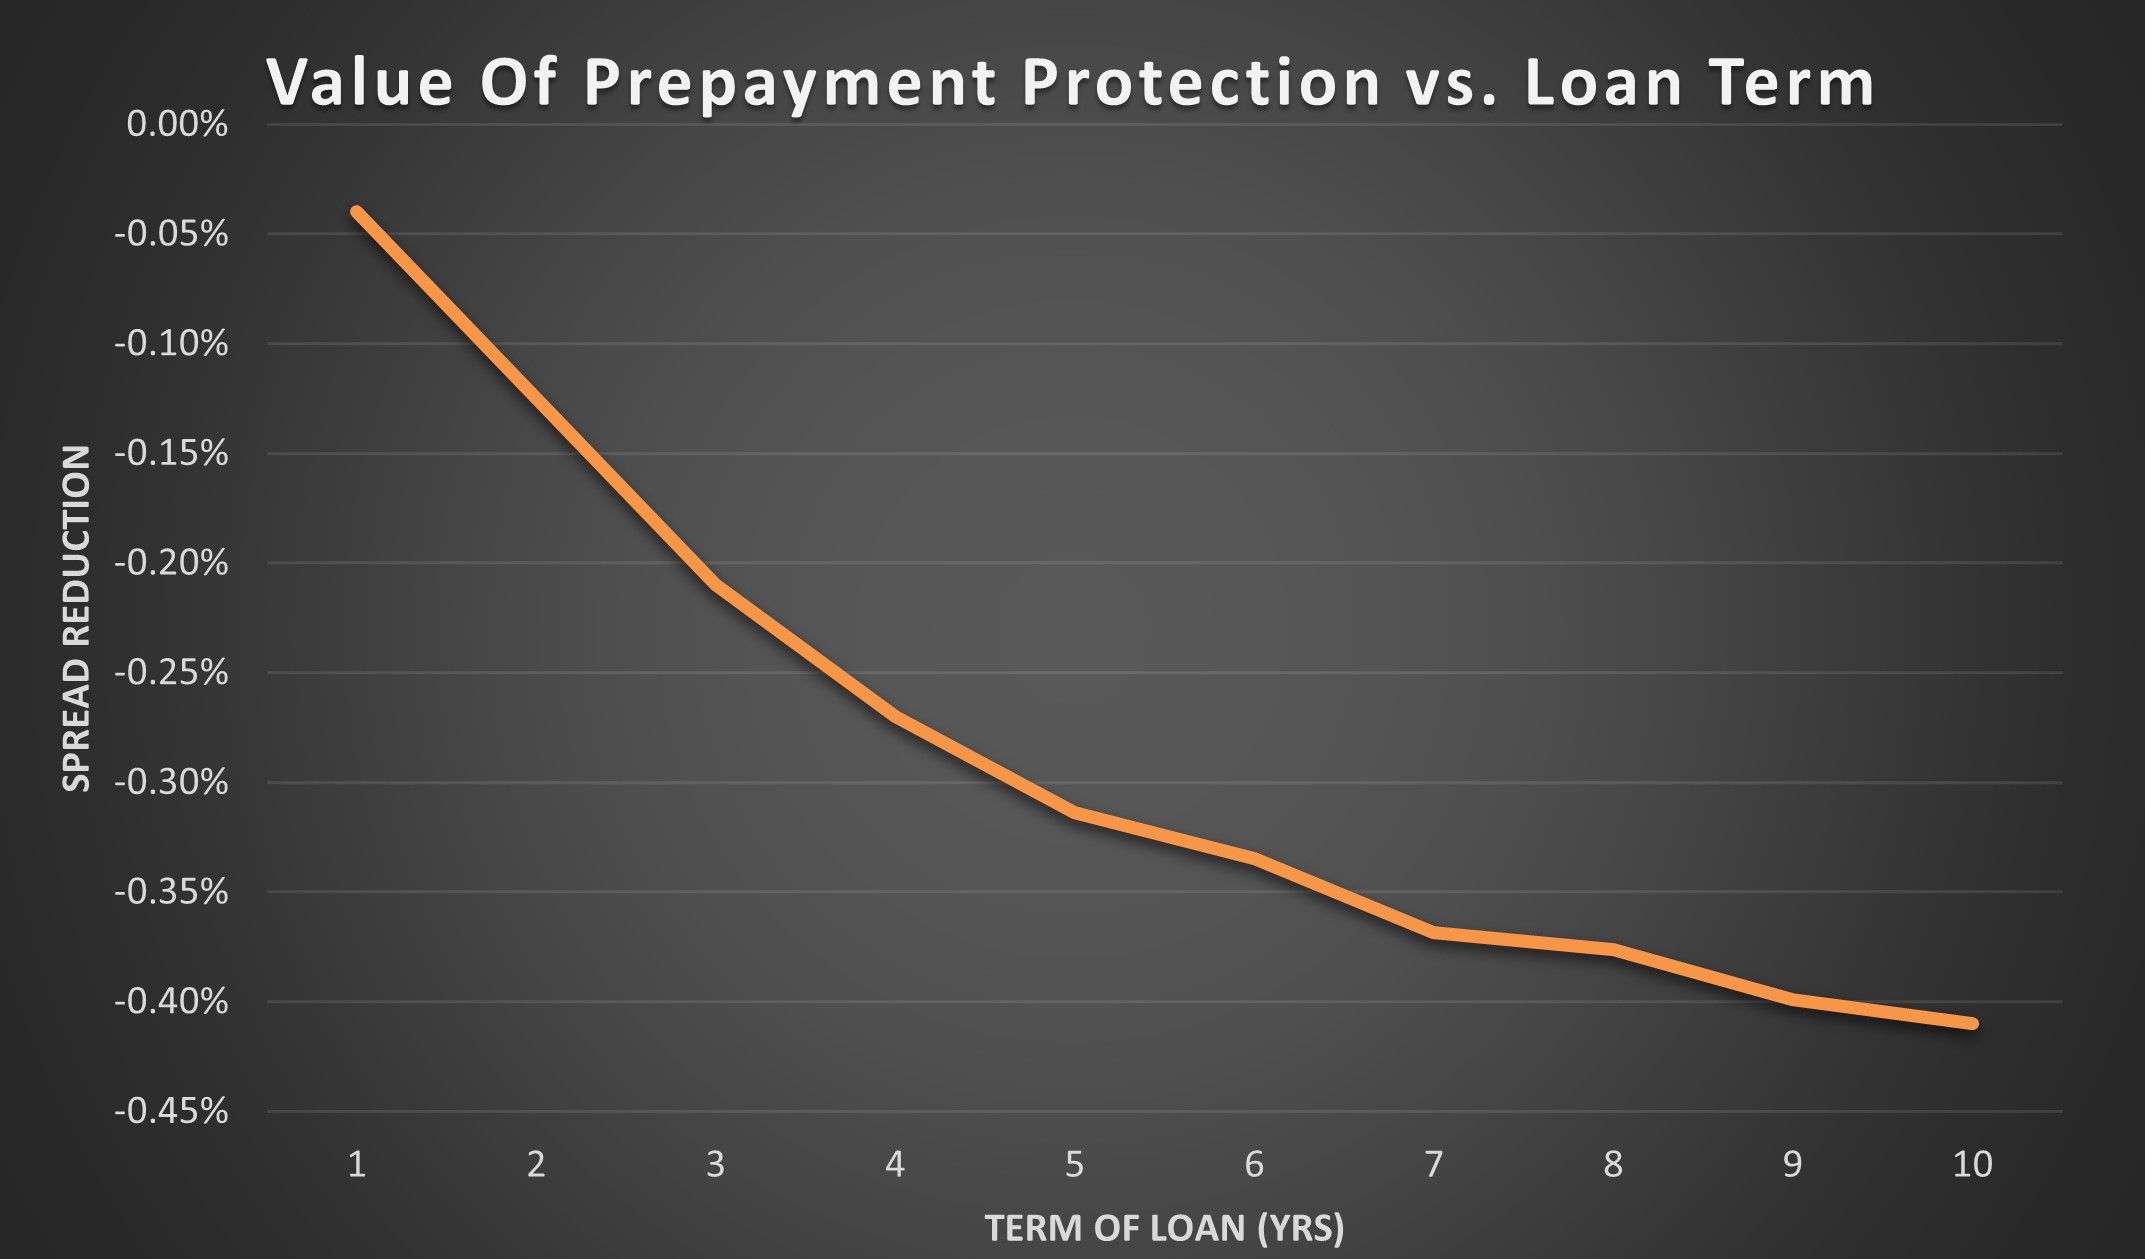 Value of Prepayment Protection